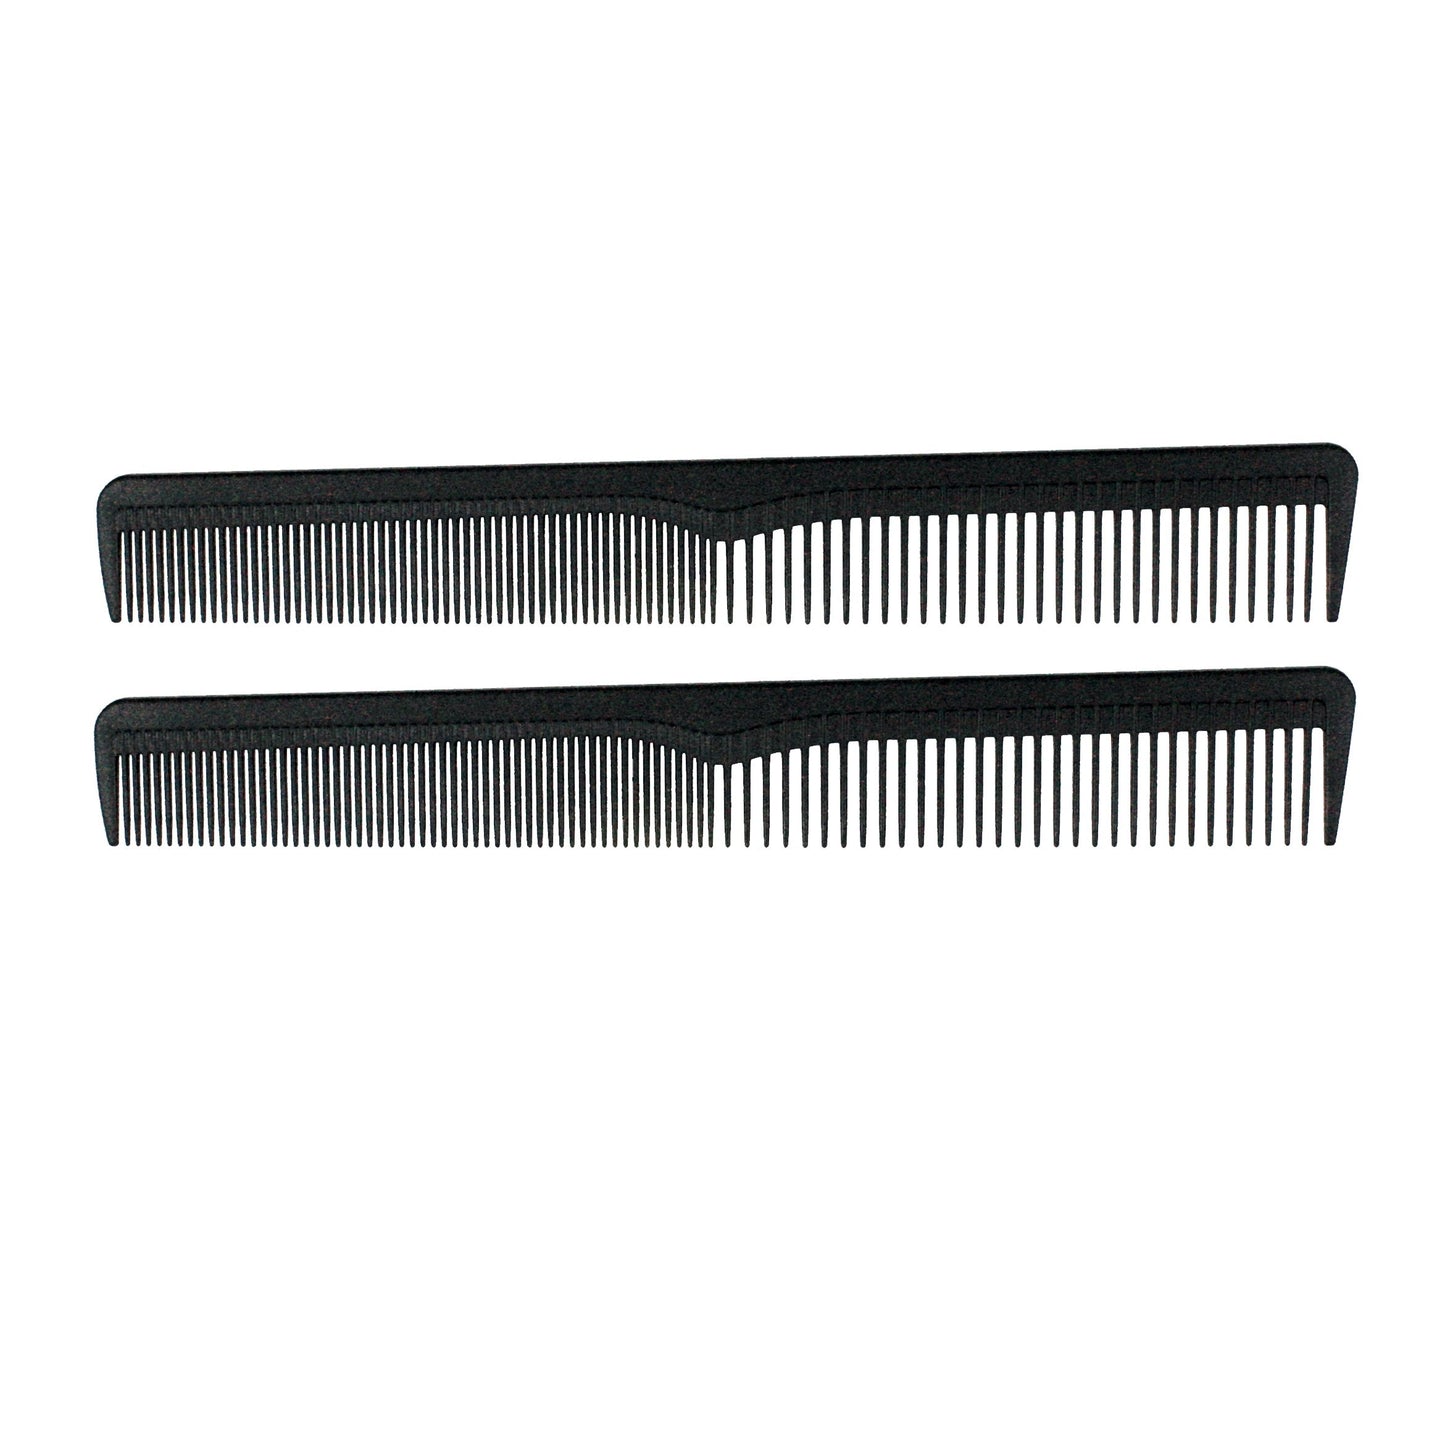 7in Carbon Cutting Comb